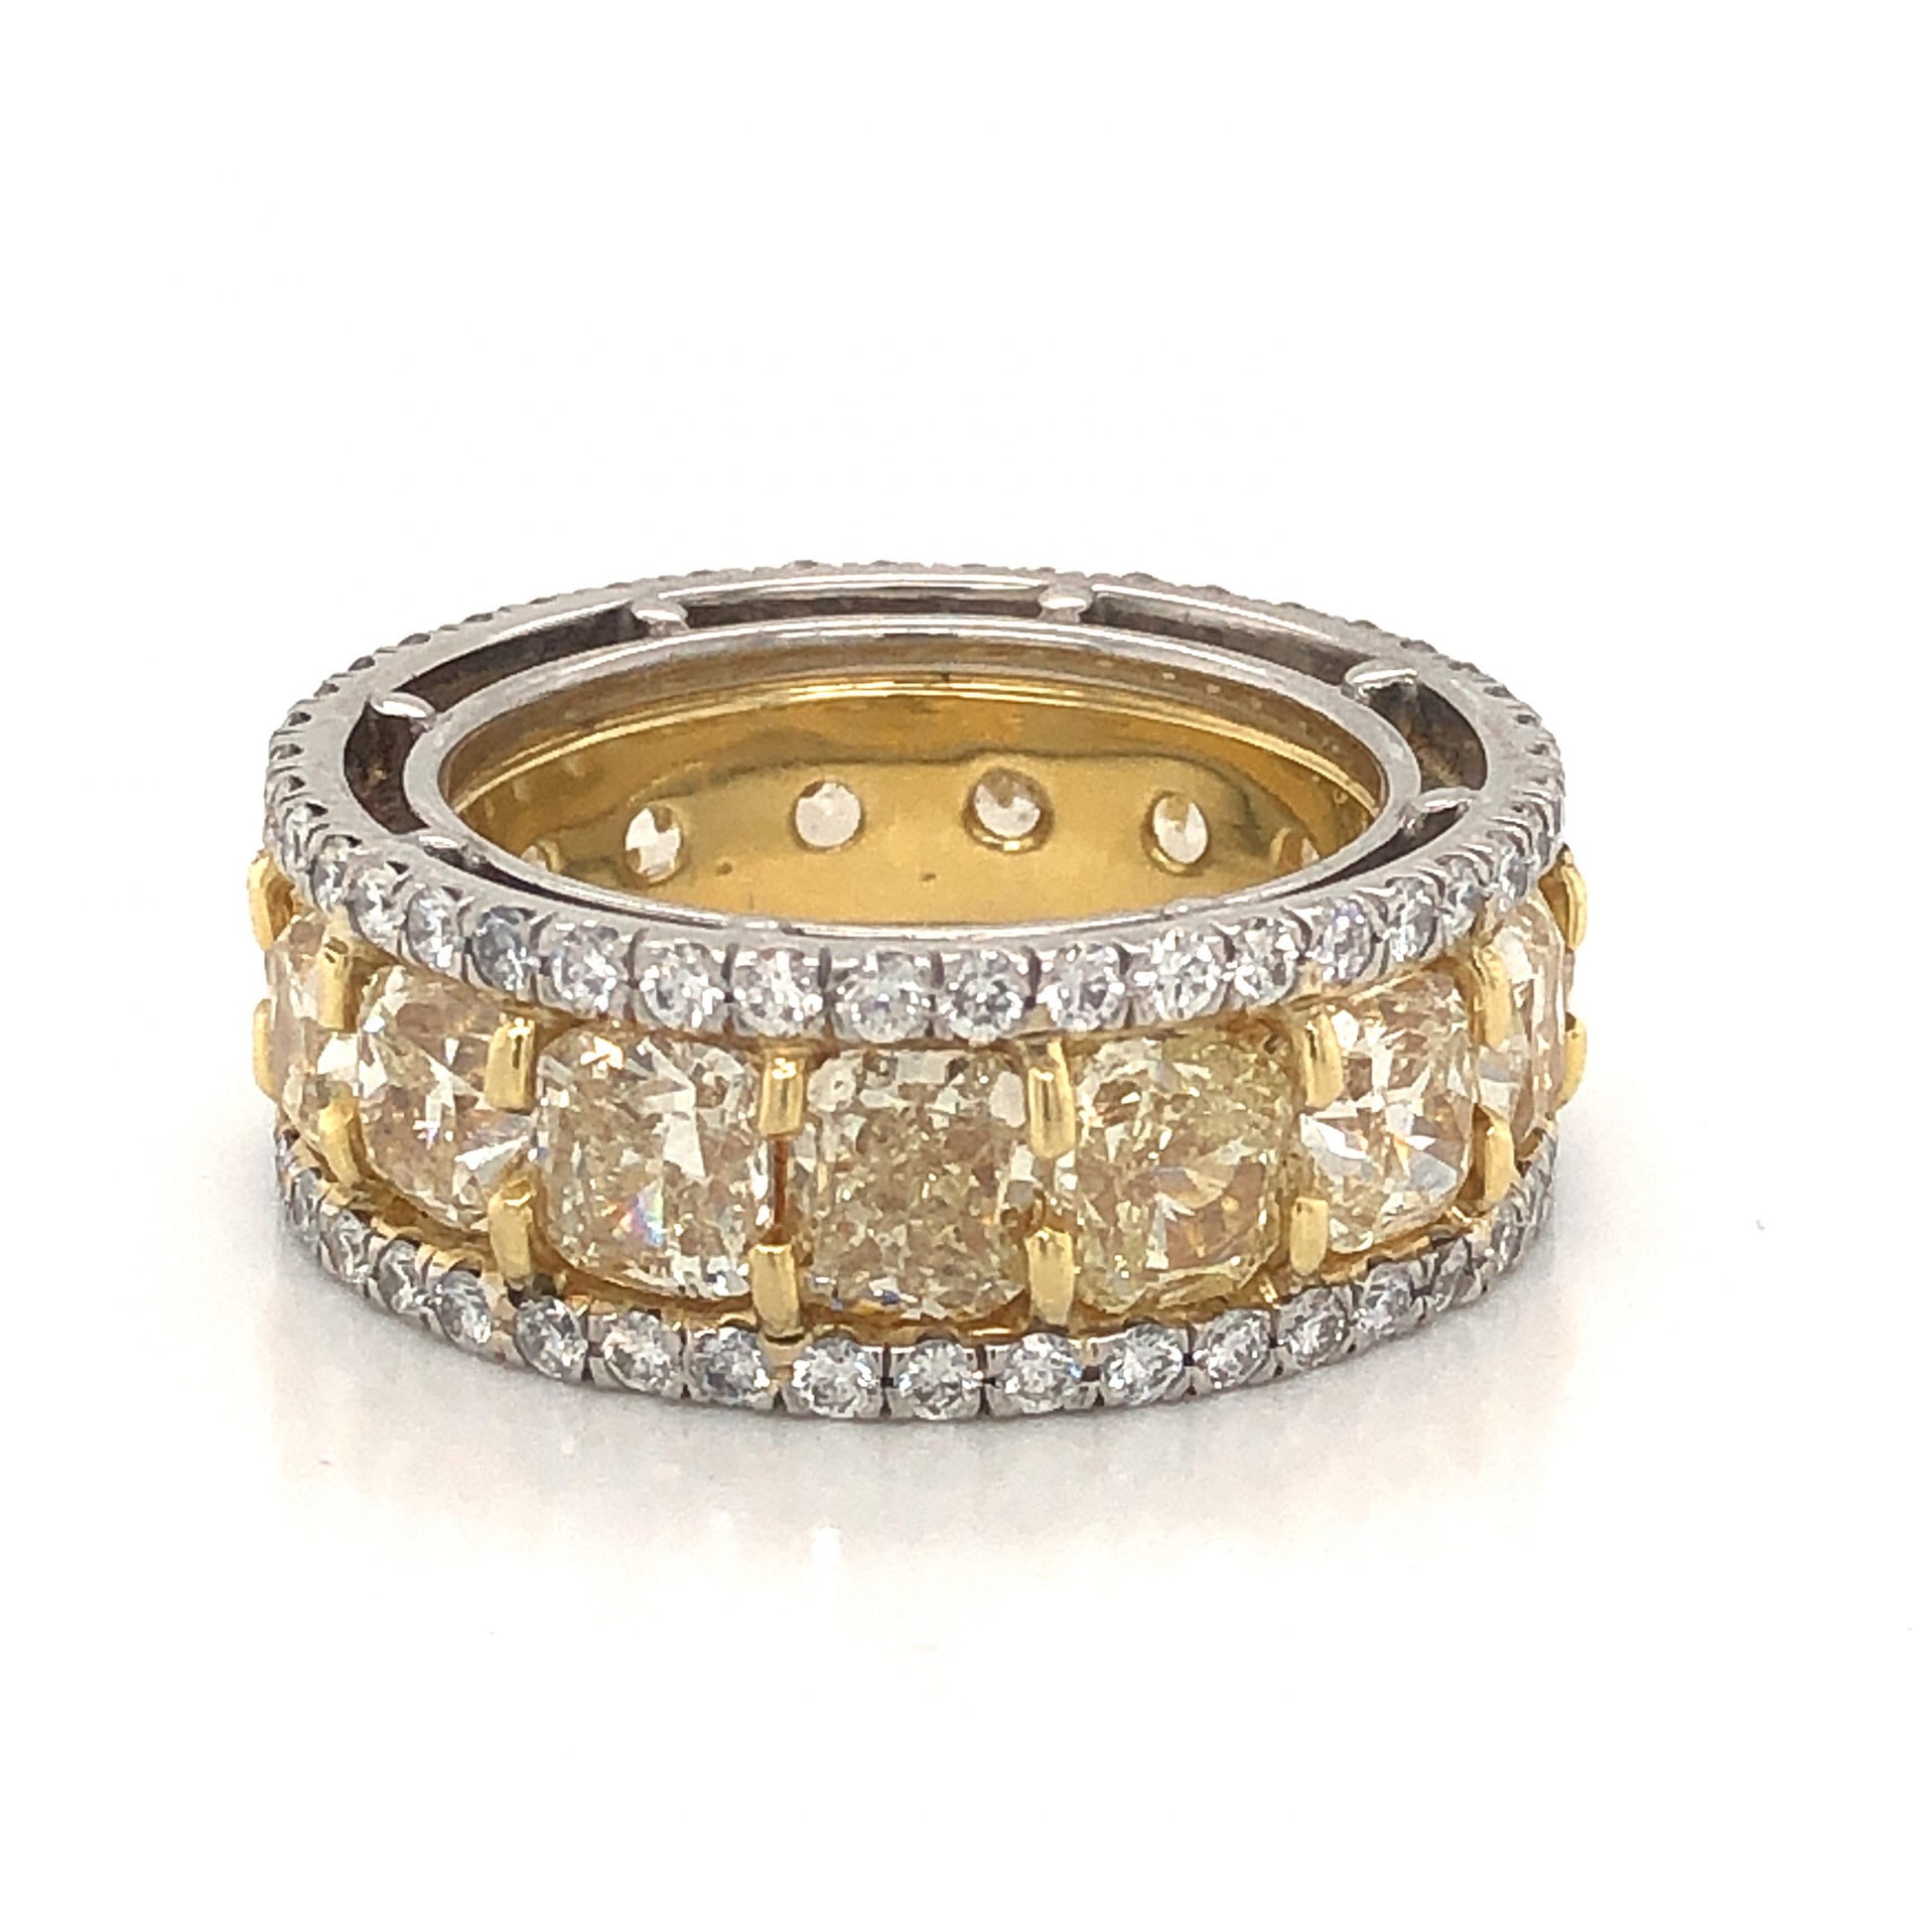 Fancy Yellow Diamond Cocktail Ring in Platinum & 18k Yellow GoldComposition: Platinum/18 Karat Yellow Gold Ring Size: 7 Total Diamond Weight: 12.38ct Total Gram Weight: 16.7 g Inscription: PT 900
      